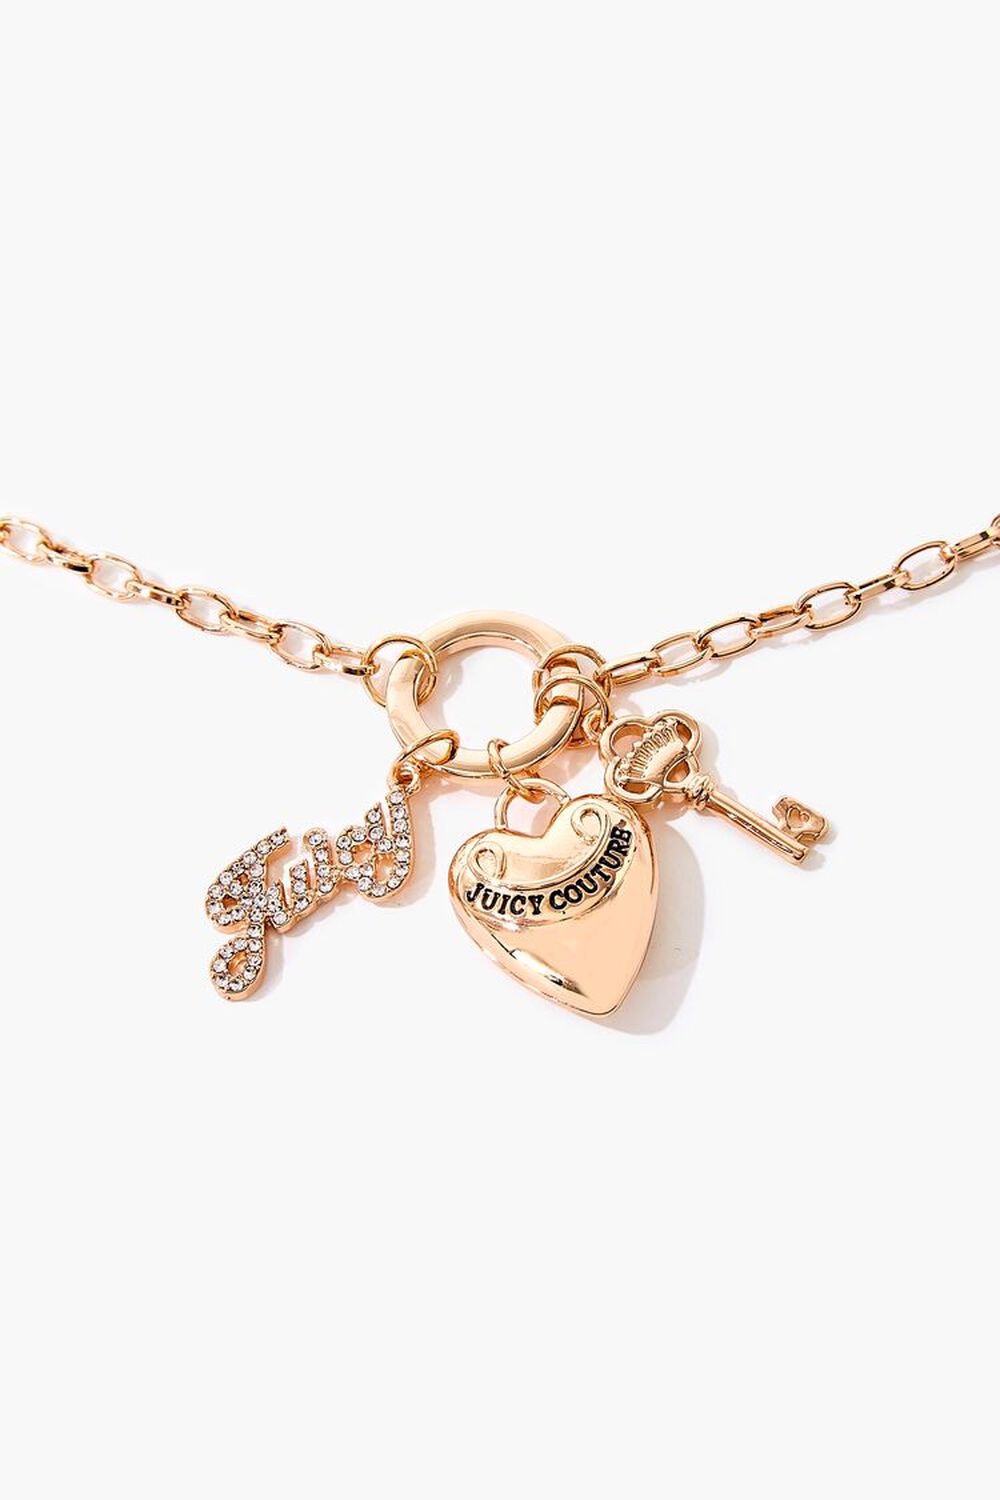 Juicy Couture Charm Necklace